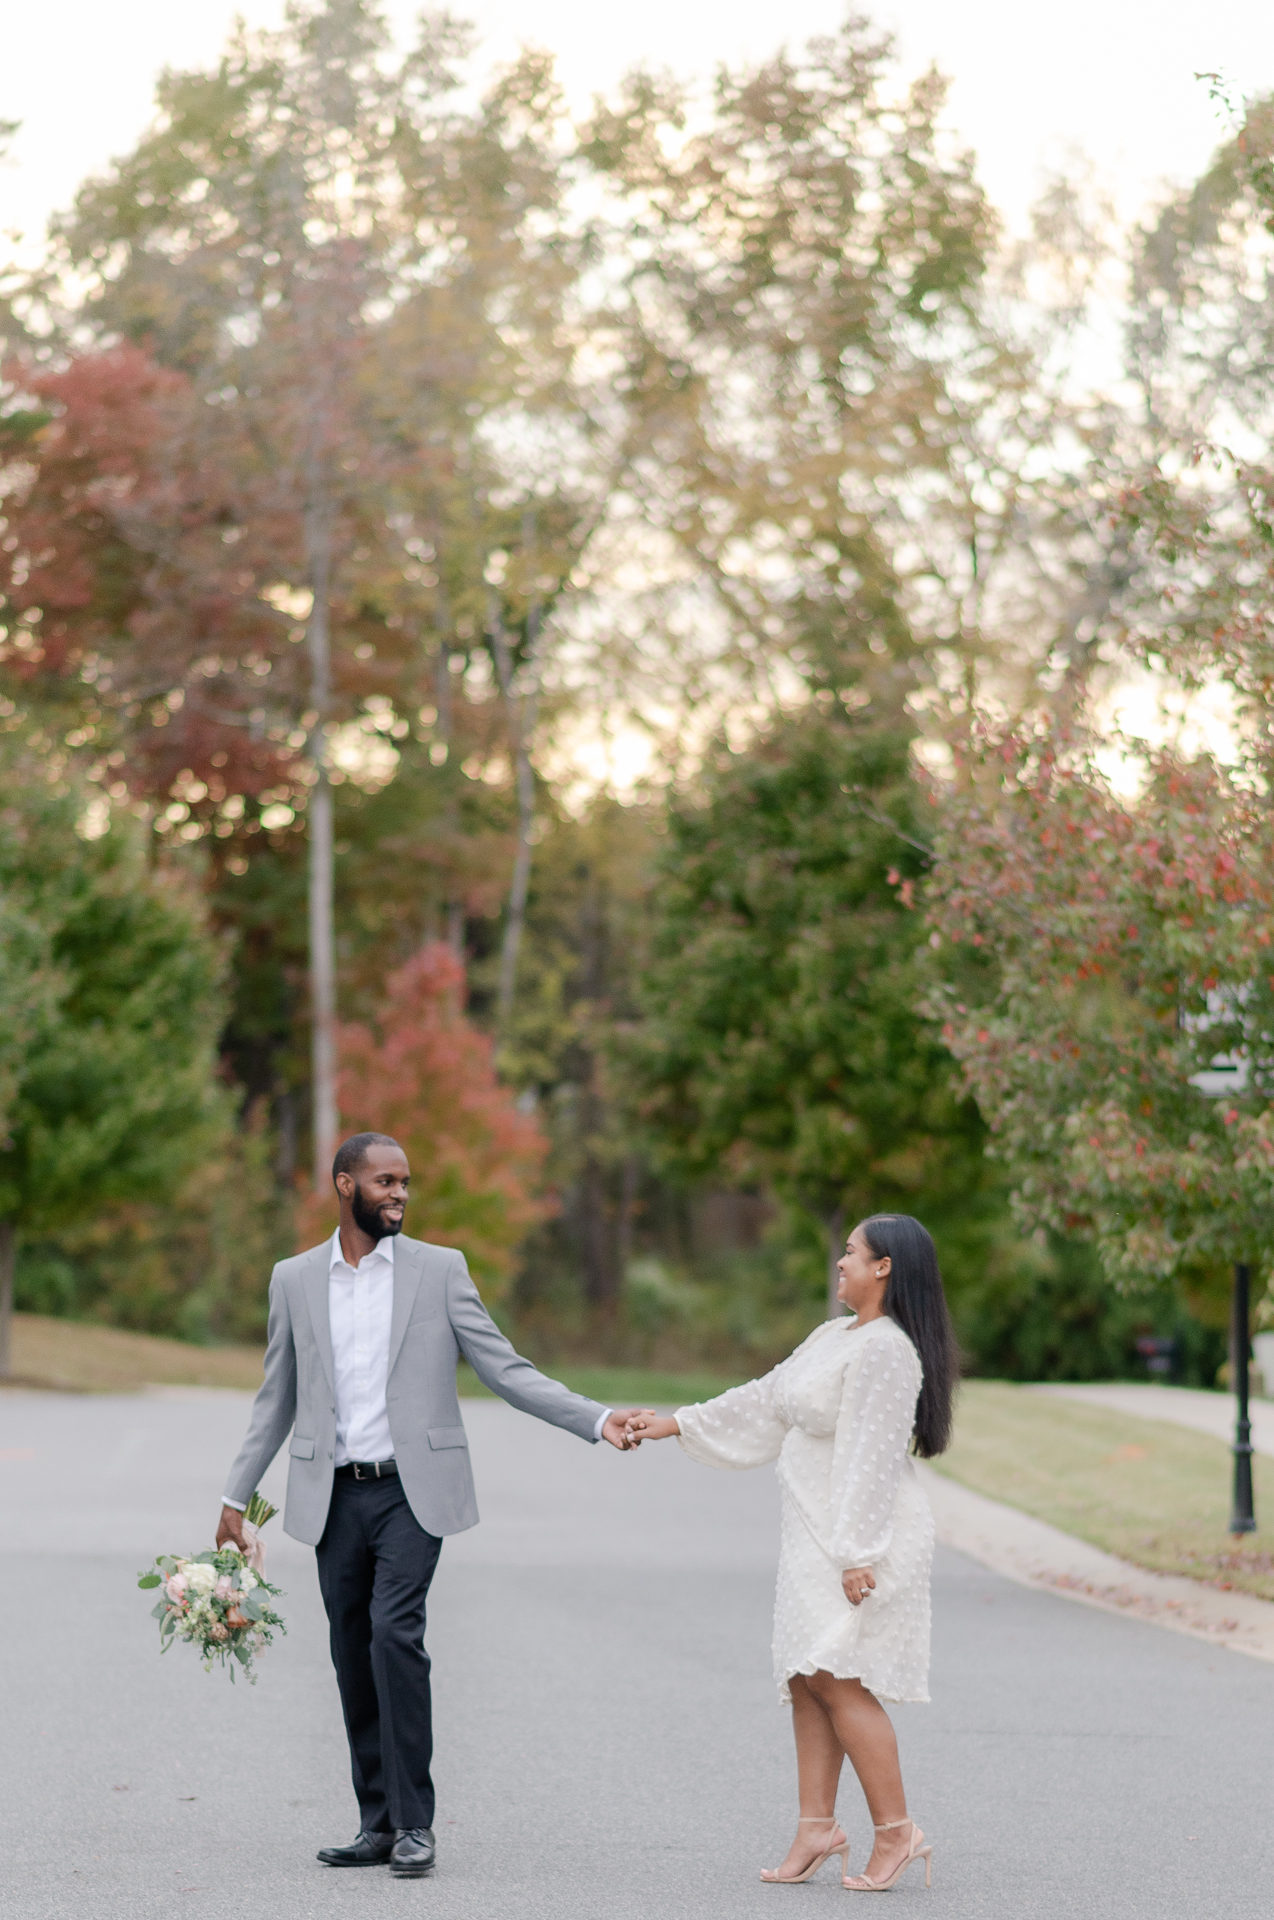 Groom holding his brides bouquet in one hand & holding his brides hand in the other guiding her across the street.